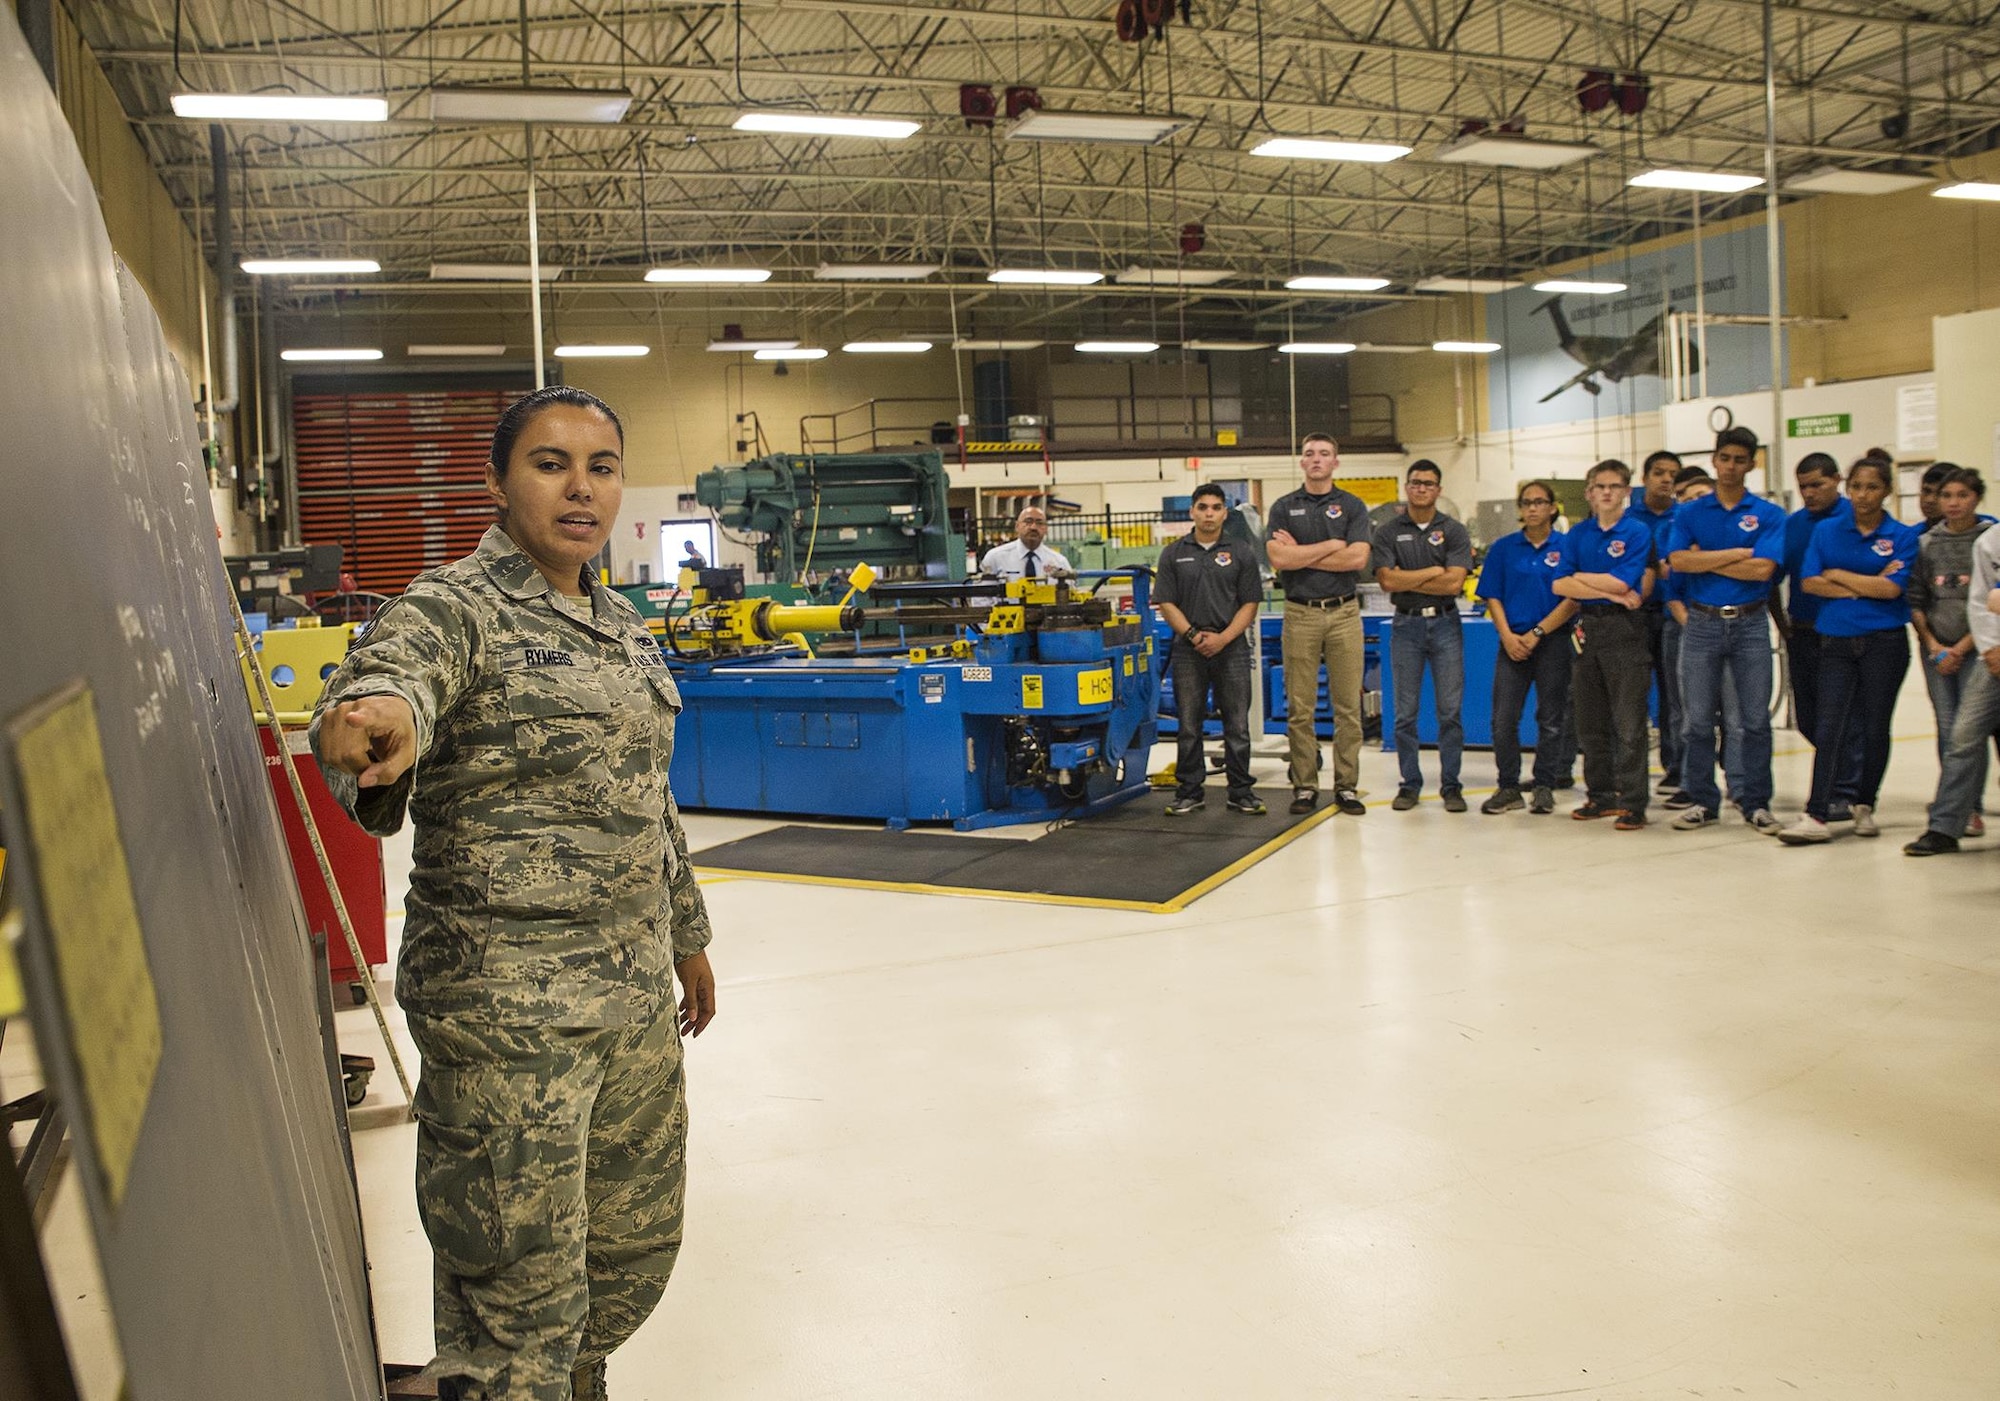 Tech. Sgt. Stephanie Rymers, a 433rd Maintenance Squadron sheet metal mechanic, shows Junior ROTC students from John Jay High School a hot bonding patch from a honeycomb panel May 12, 2016 at Joint Base San Antonio-Lackland, Texas. The students toured the survival, engine, and structural engineering shops at the 433rd Airlift Wing and also saw a Military Working Dog demonstration at the 341st Training Squadron. (U.S. Air Force photo by Benjamin Faske) (released)